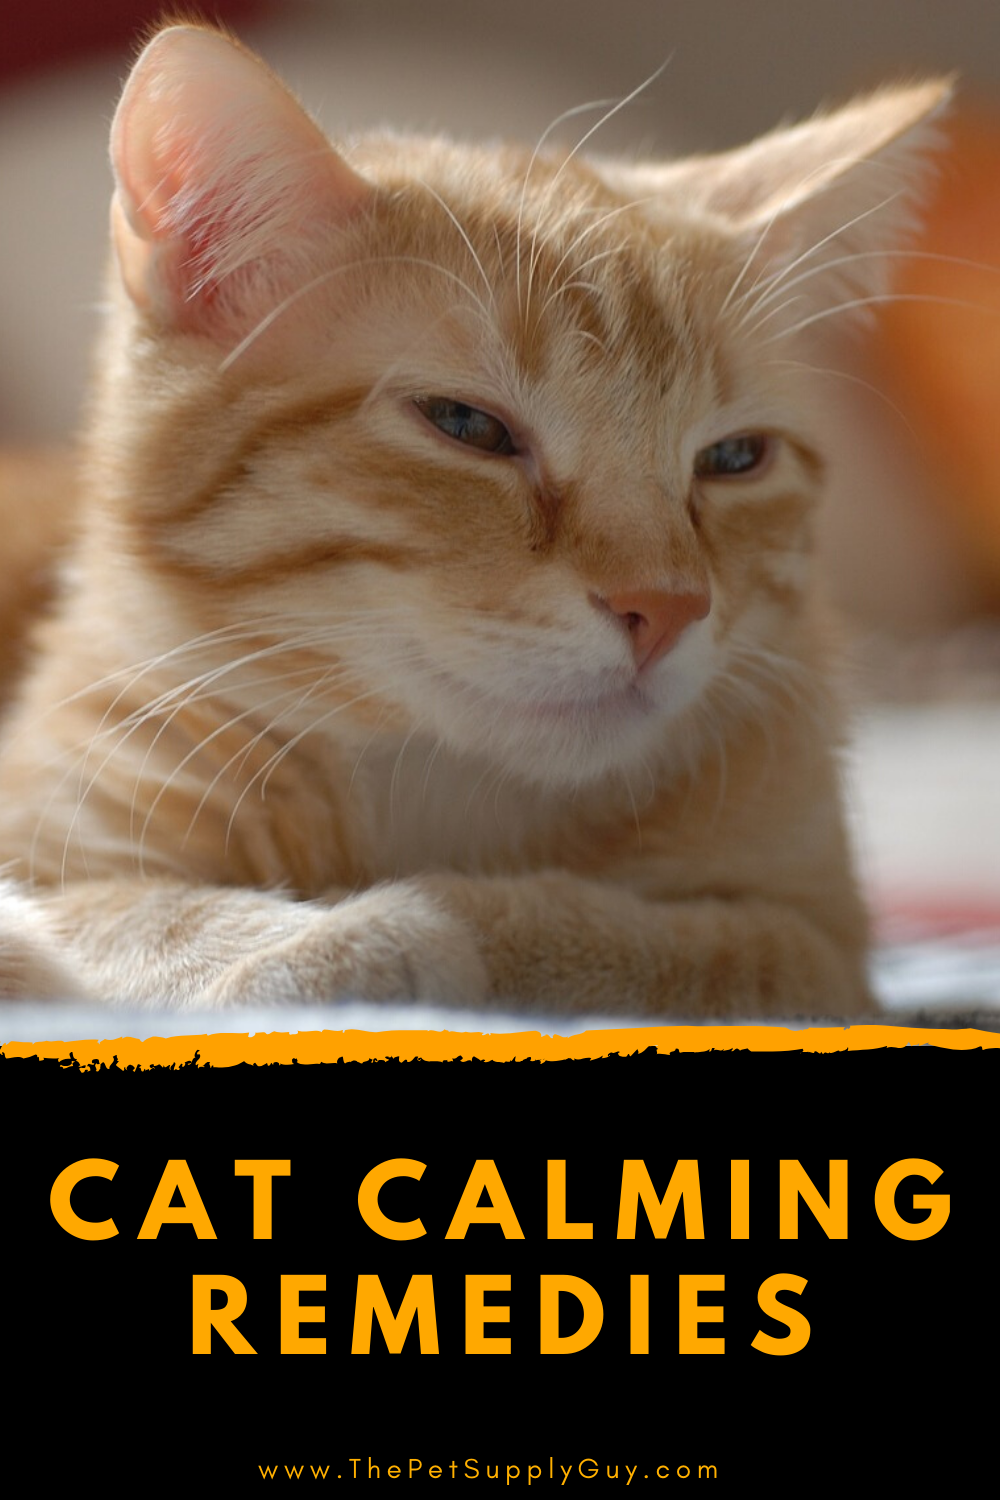 Cat Calming Products Review